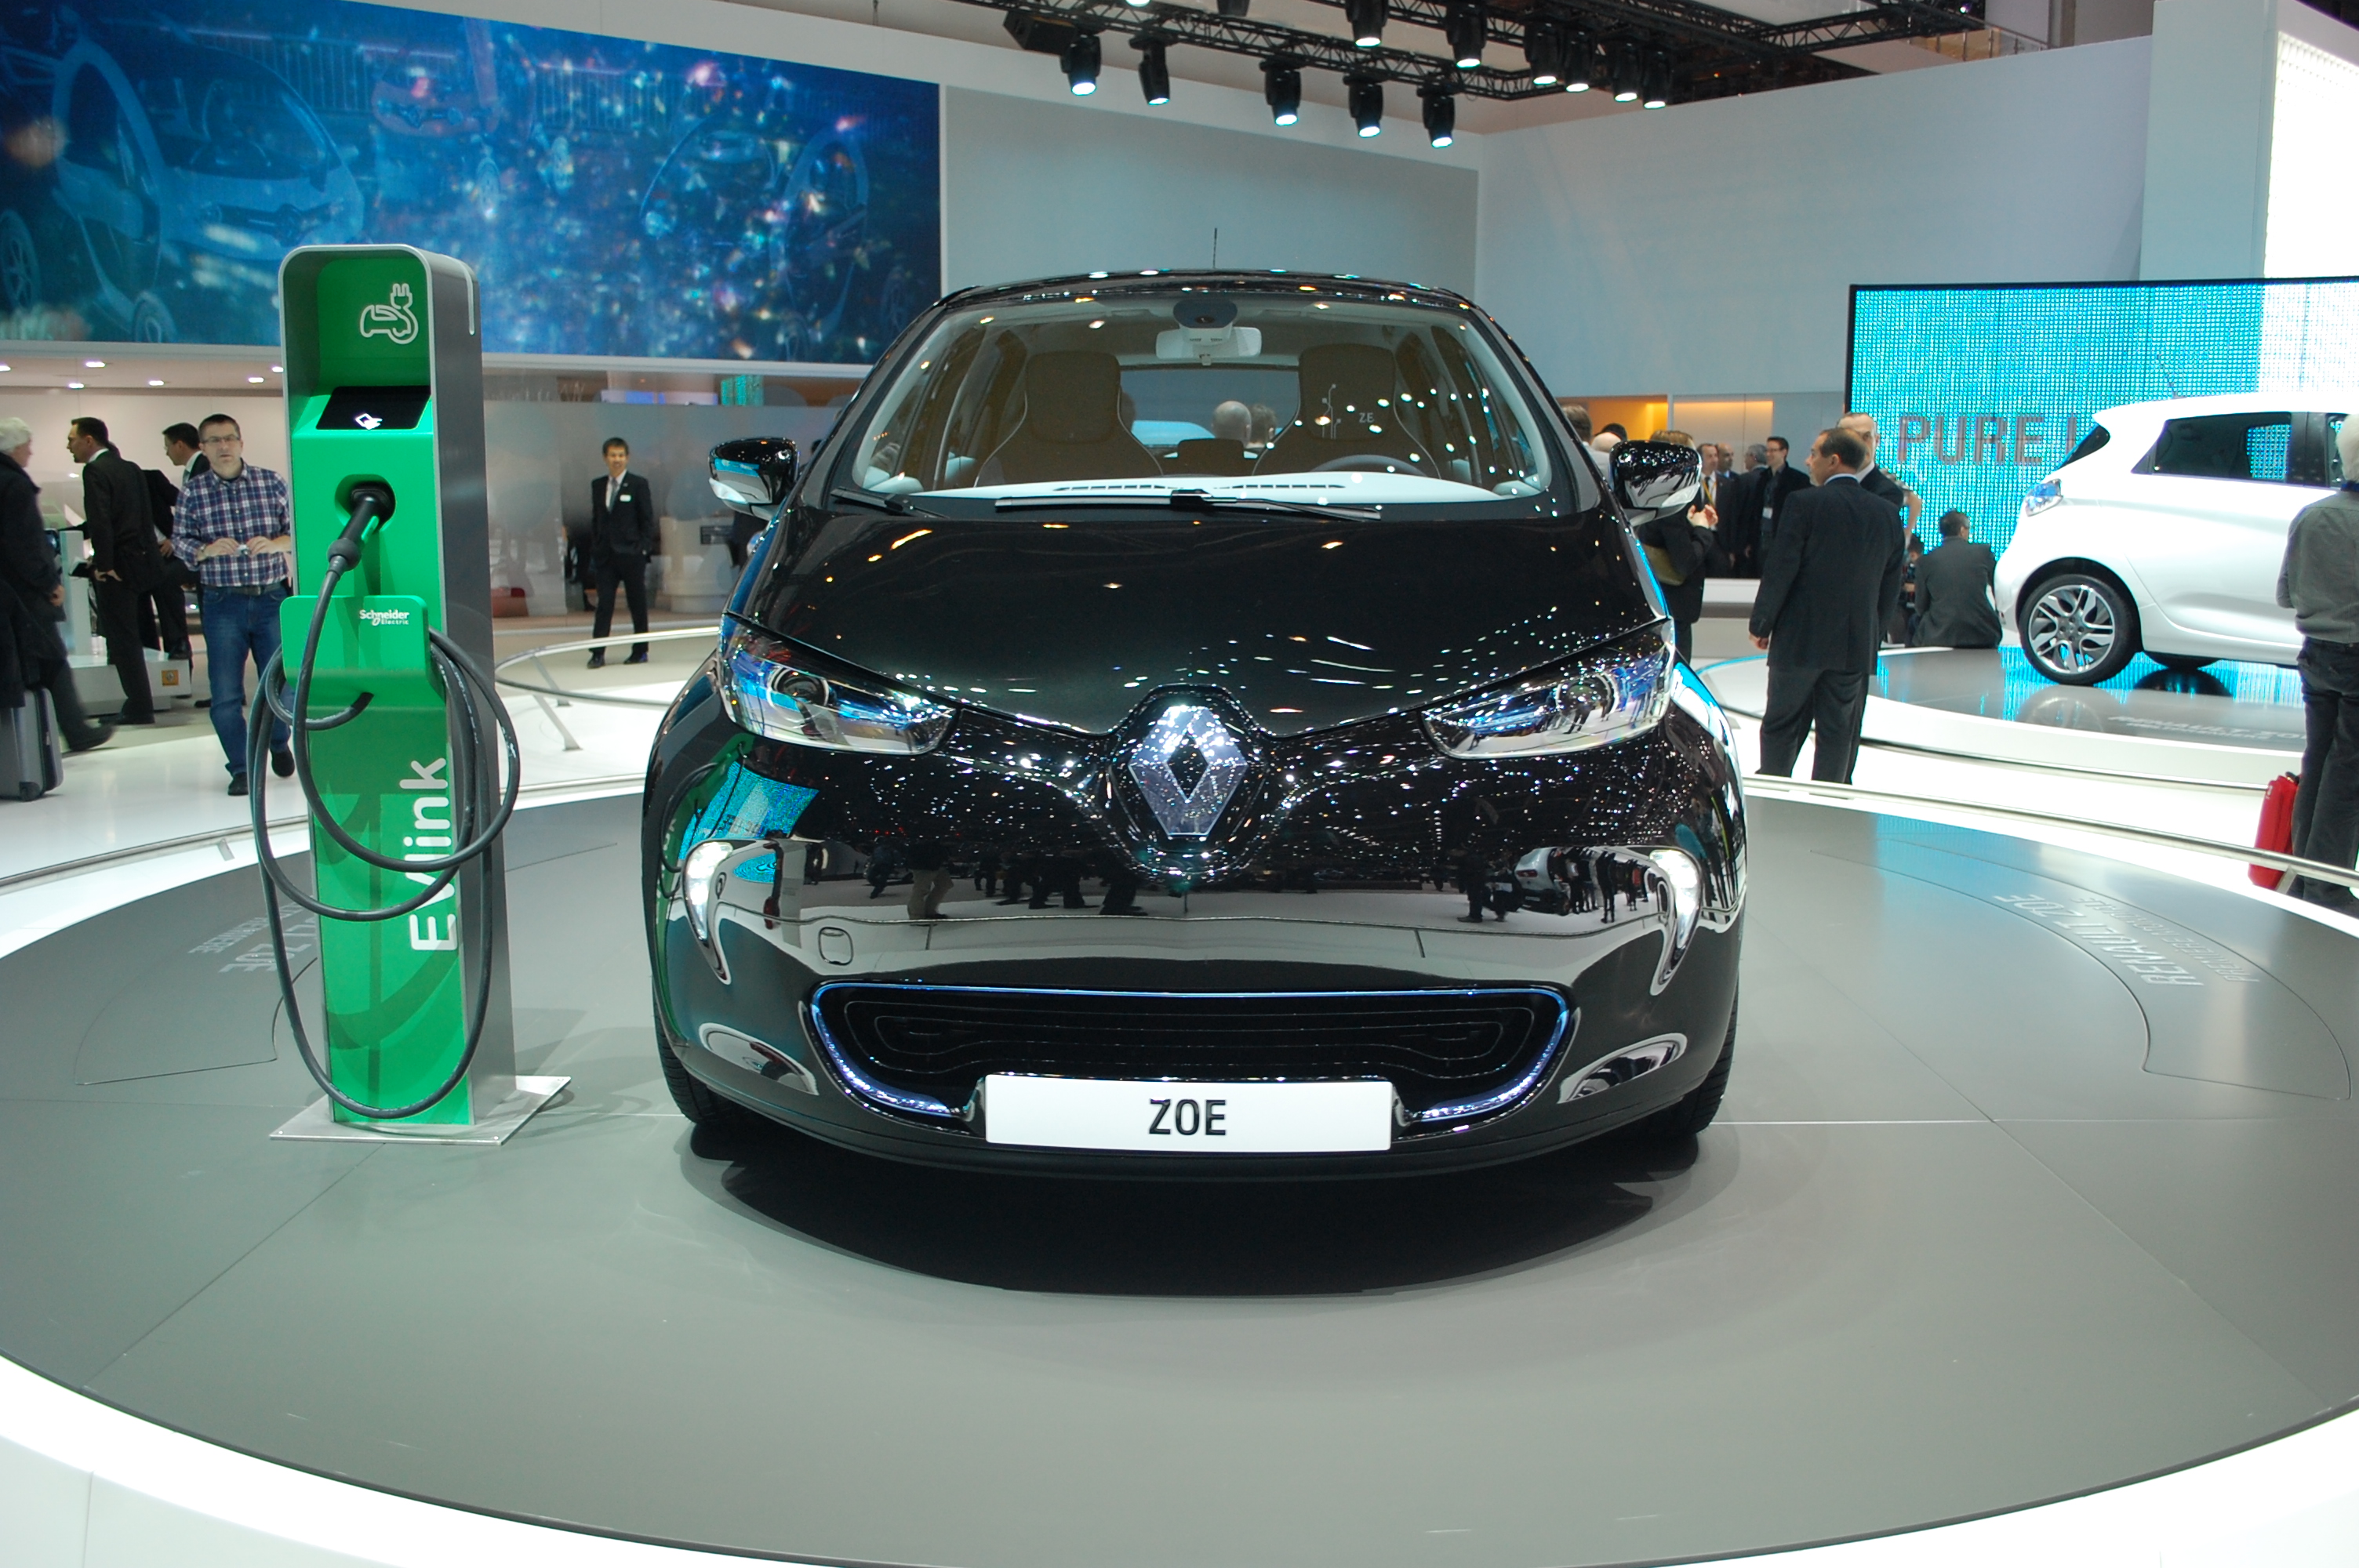 2013 Renault Zoe: A Stylish, Normal Complement To The 